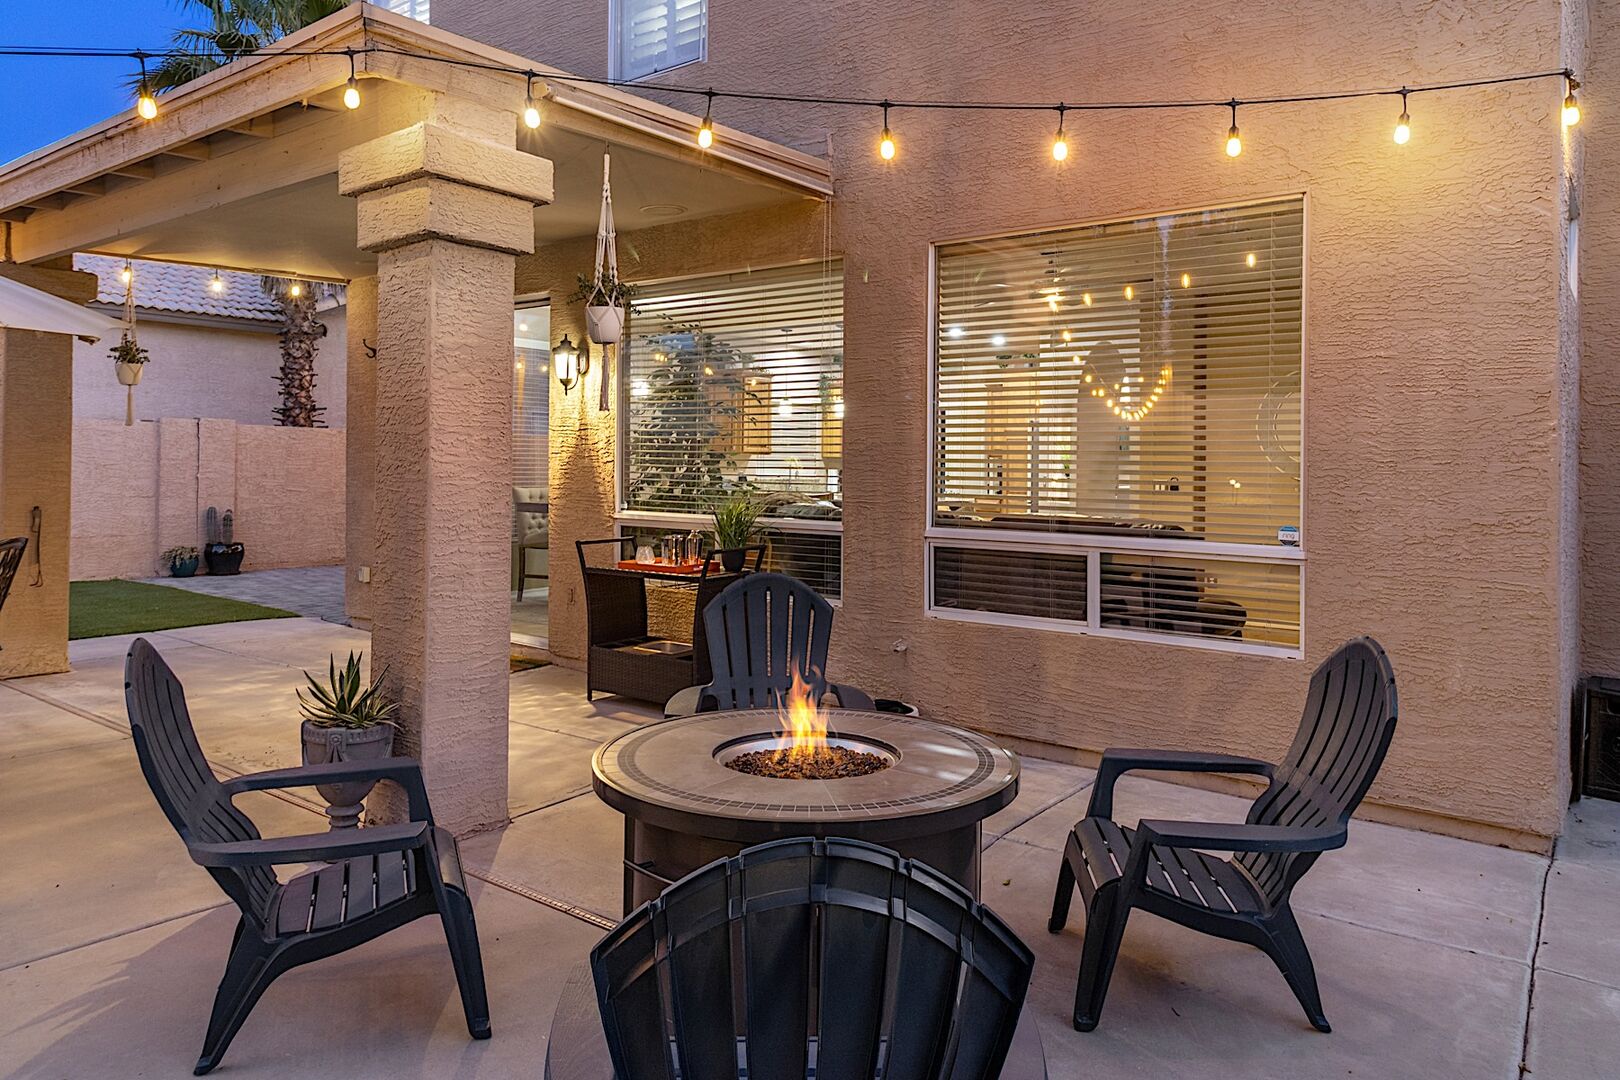 Fire Pit Sitting Area